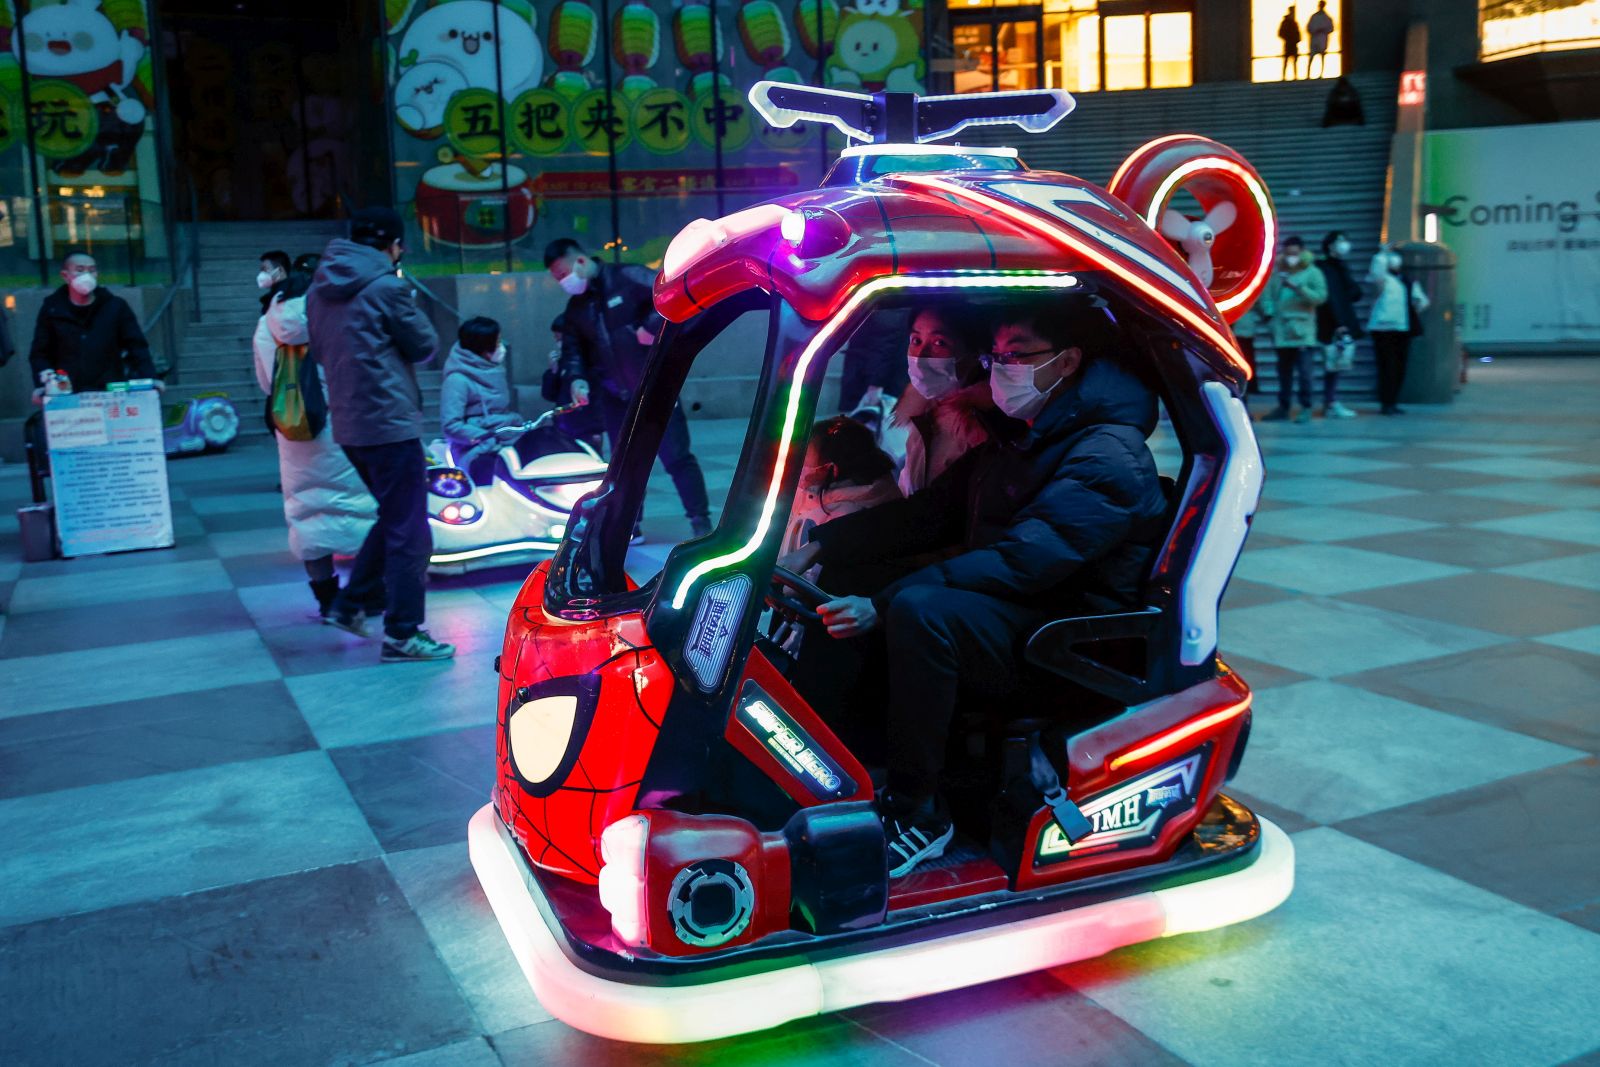 epa10383803 A family rides a Spiderman themed vehicle at a shopping district amid the COVID-19 outbreak during New Year's Eve in Beijing, China, 31 December 2022. The World Health Organization (WHO) has urged Chinese officials to share real-time information on COVID-19 as infections continue to surge after restrictions have been lifted around the country.  EPA/MARK R. CRISTINO